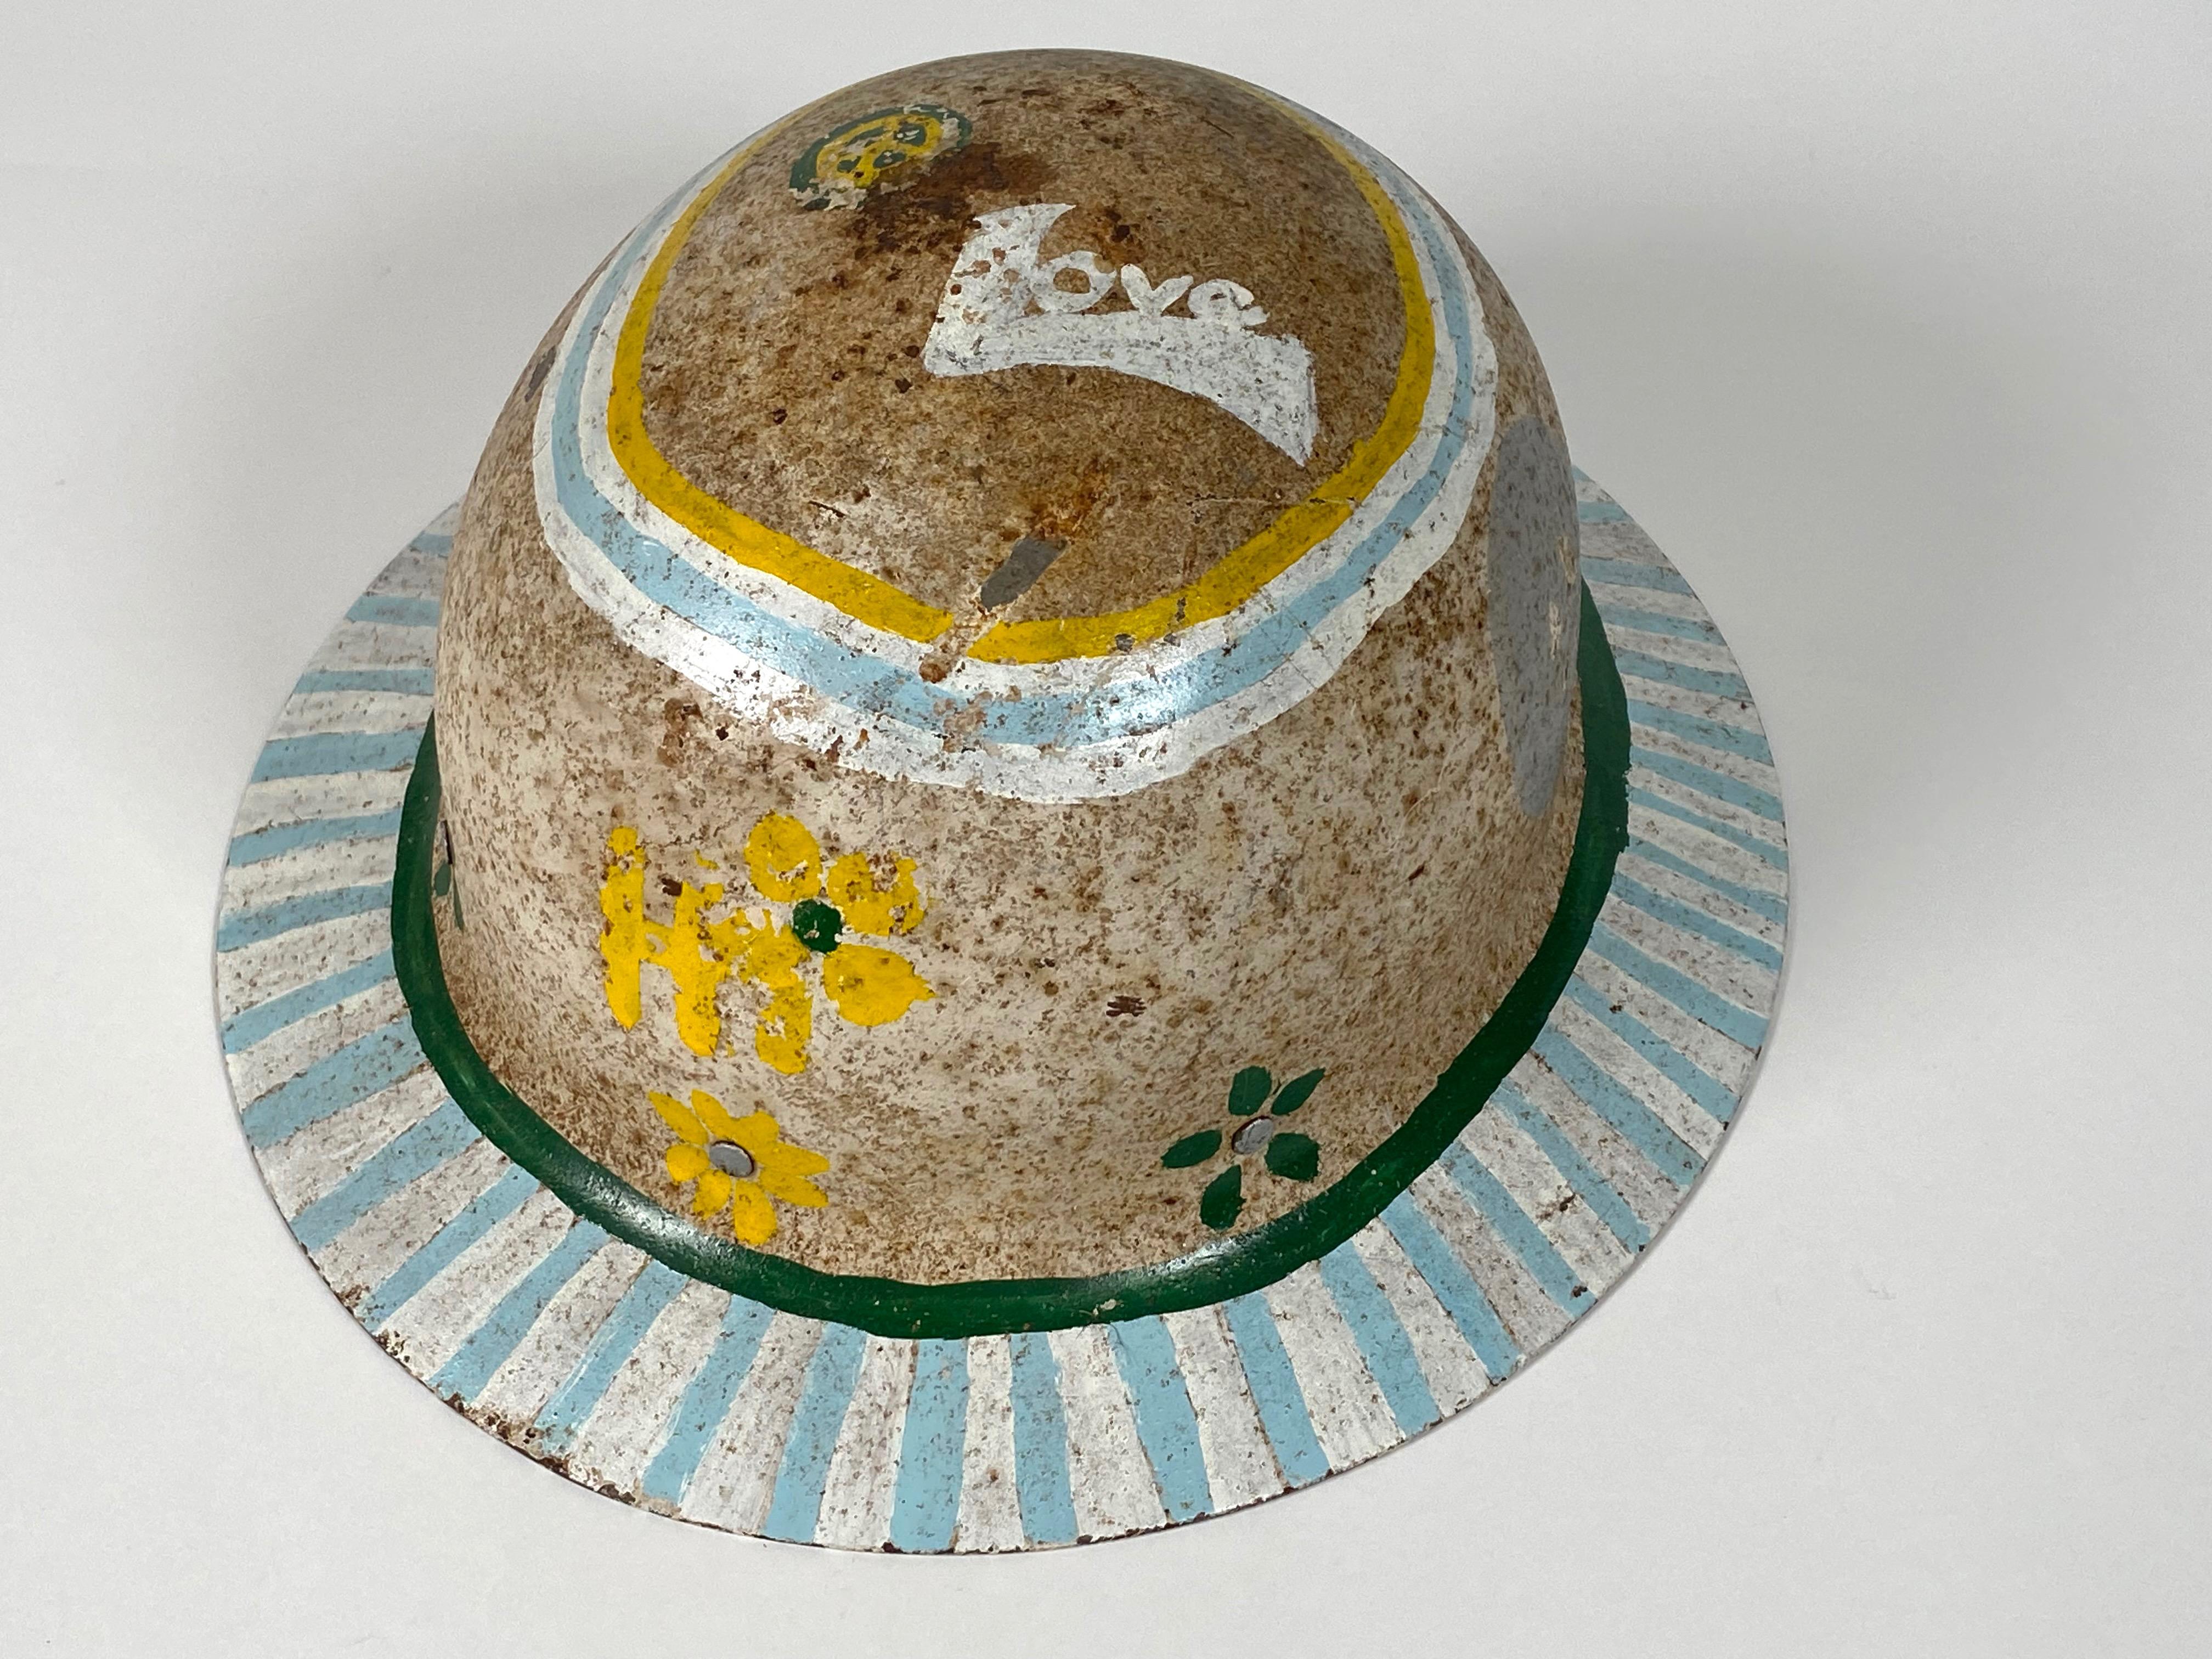 Original 1960s hand painted Hippie hardhat, embellished with Peace Signs, Flowers and the words Peace, Love and Hi. Painted with green, silver, white and pale blue. The brim has contrasting white and blue bands. Patina to the white paint with